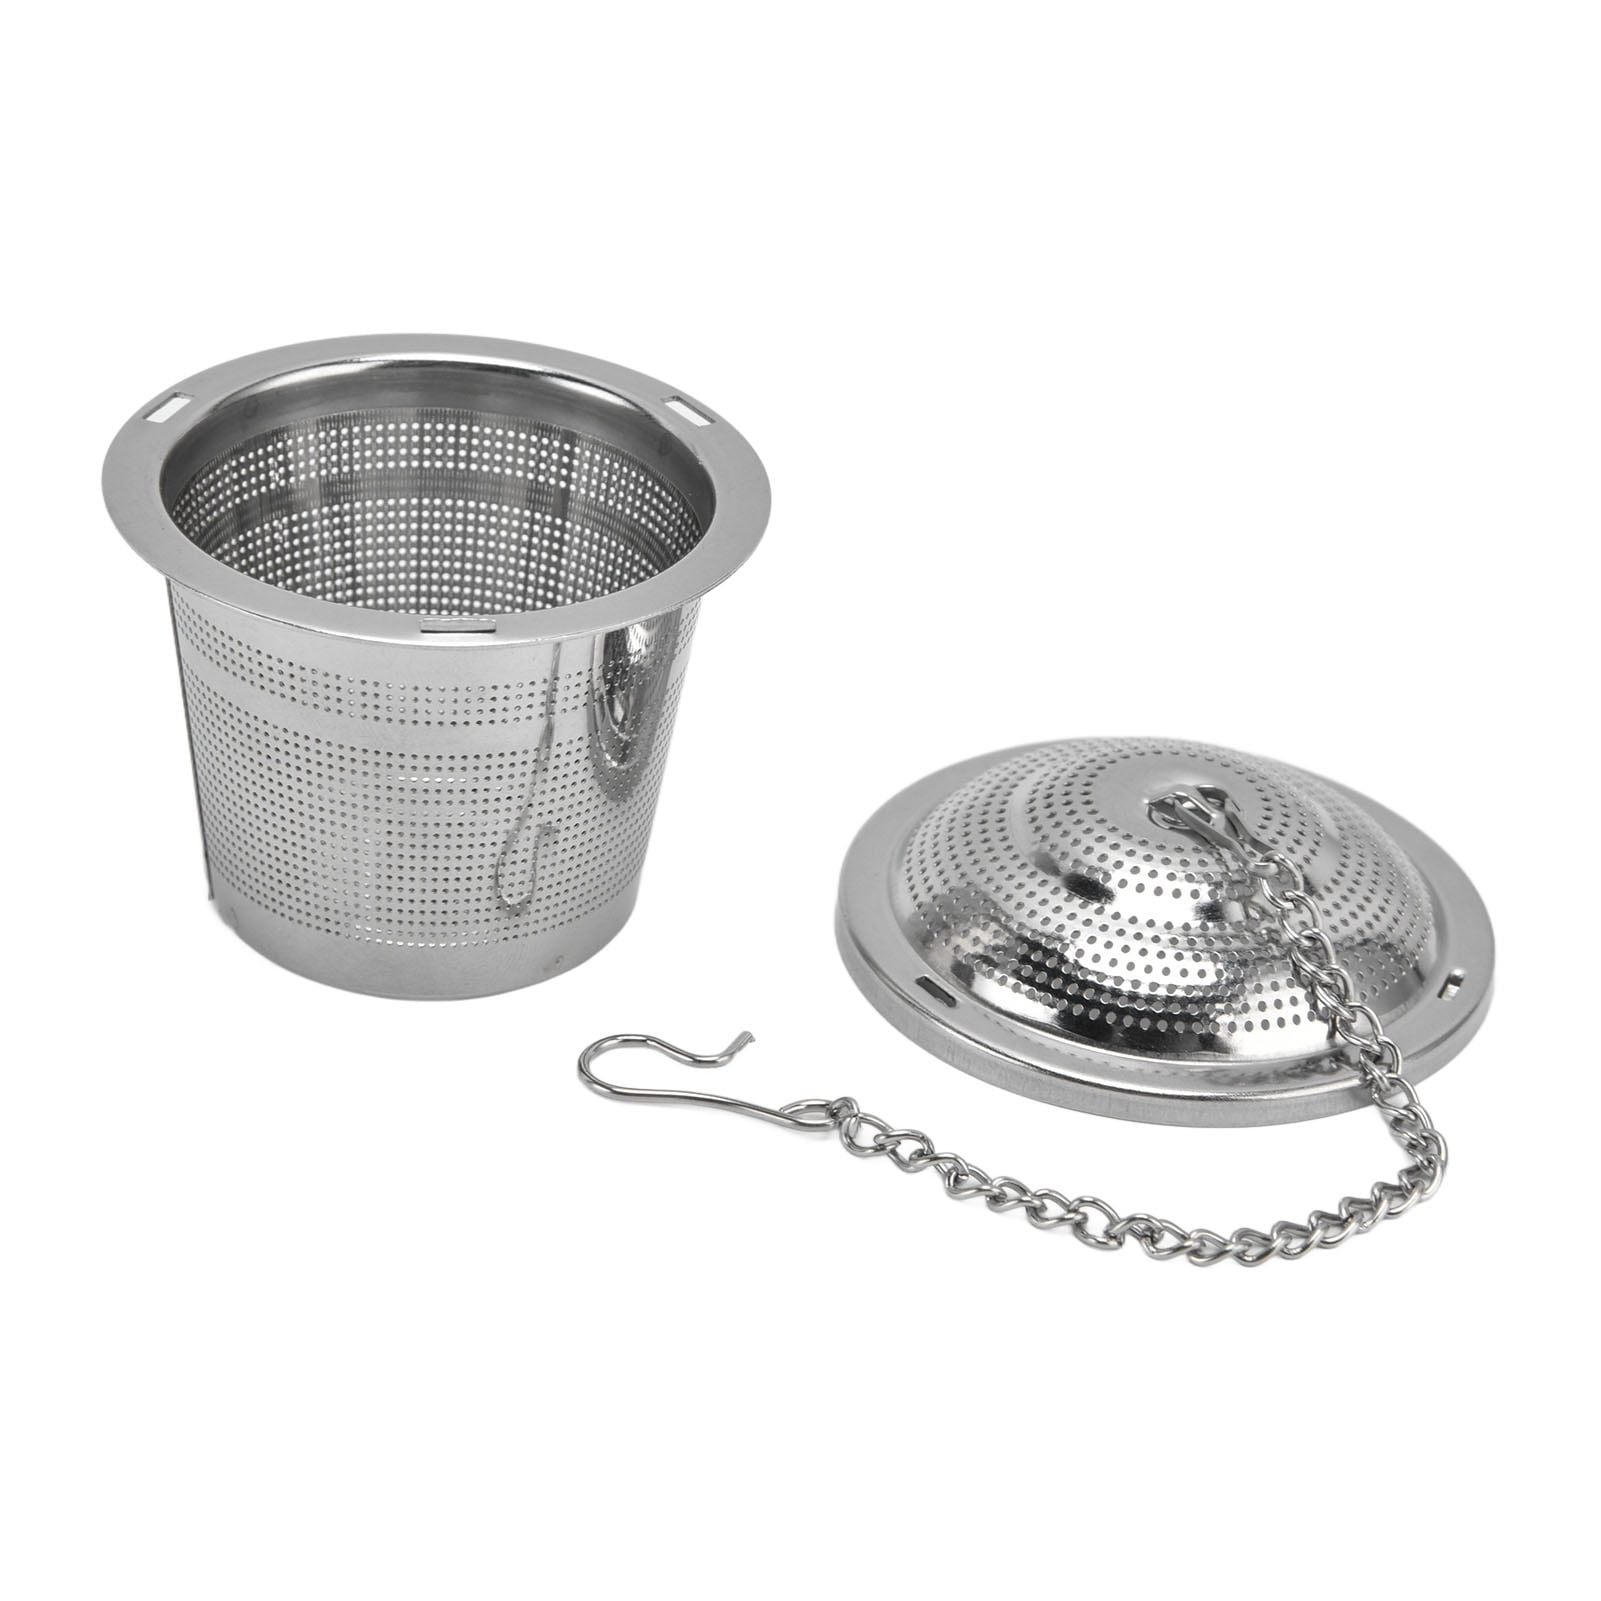 Easy to Use Silver Easy to Clean Tea Steeper Baskets Transer Stainless steel Tea Infuser Tea Strainers Small Teapot for Steeping Loose Leaf Tea Safe 